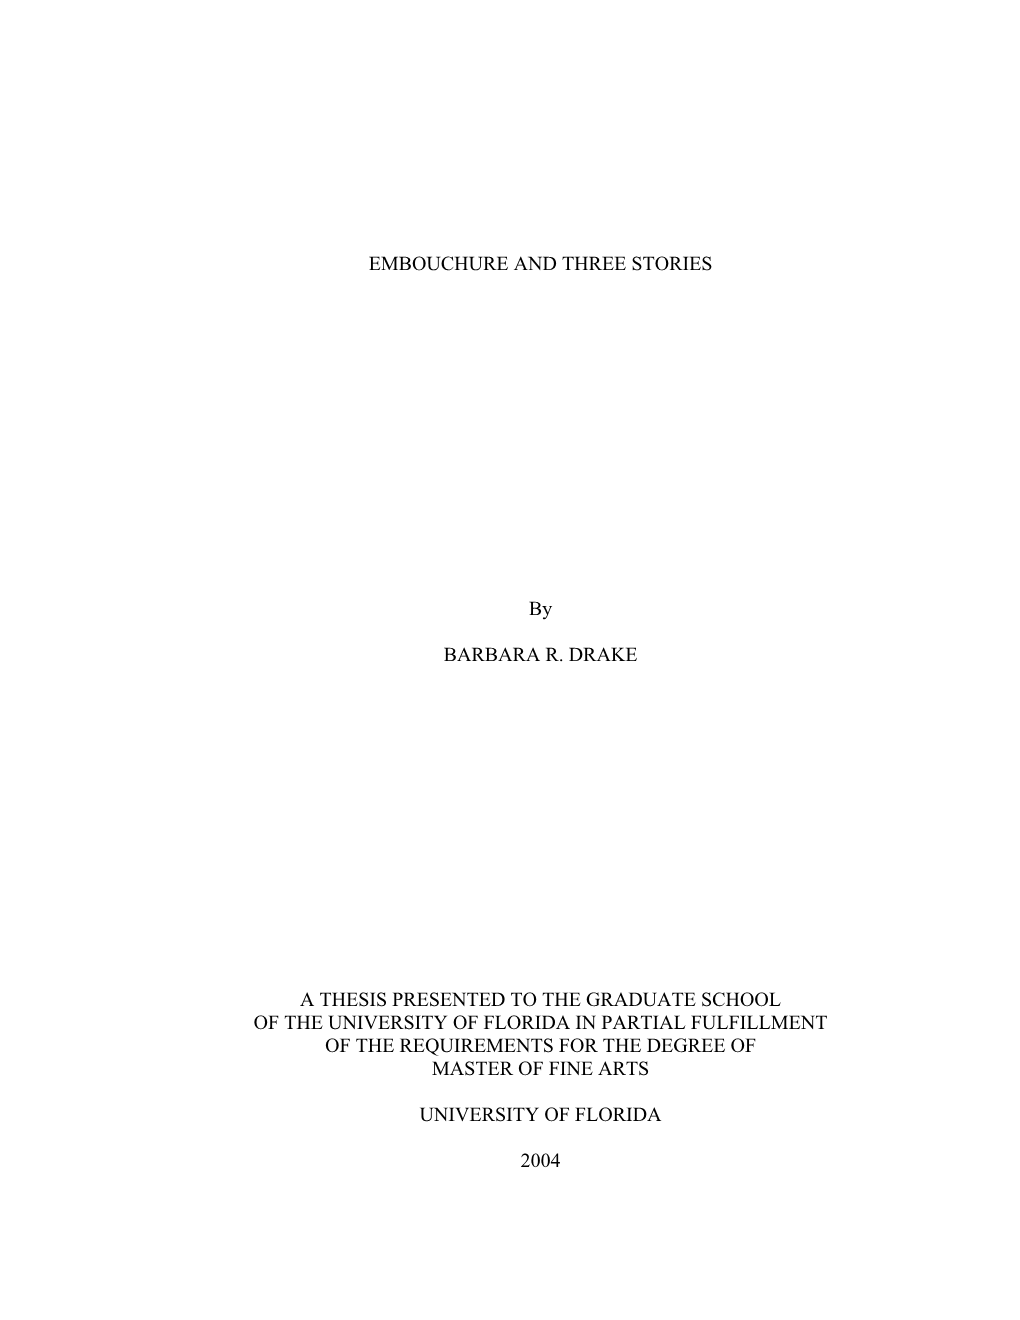 EMBOUCHURE and THREE STORIES by BARBARA R. DRAKE a THESIS PRESENTED to the GRADUATE SCHOOL of the UNIVERSITY of FLORIDA in PARTI